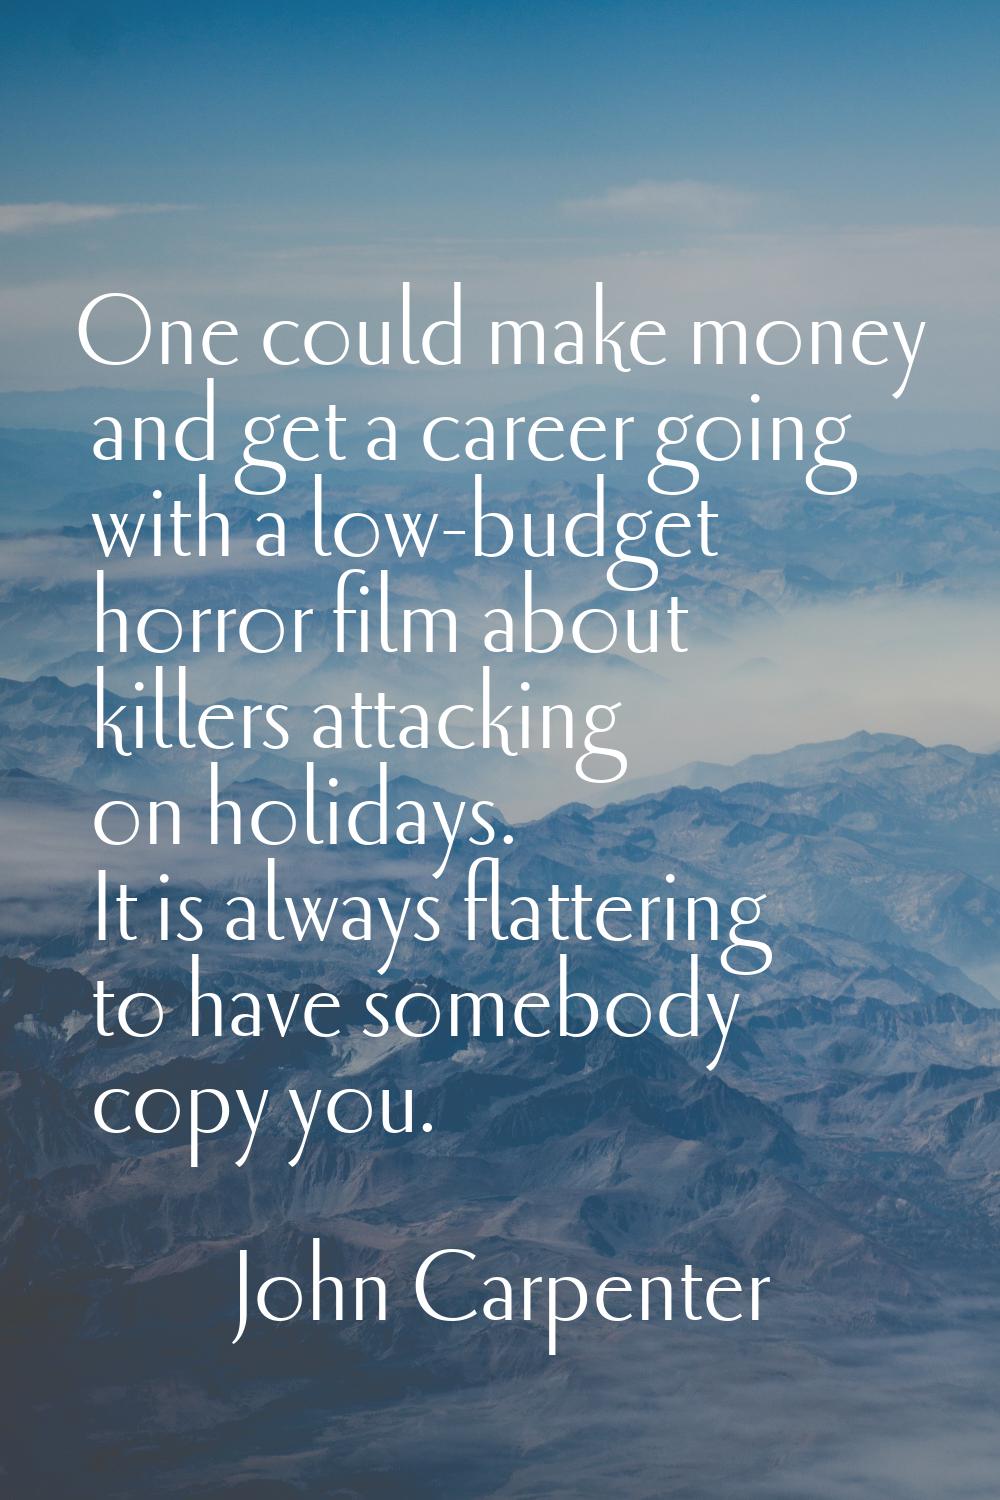 One could make money and get a career going with a low-budget horror film about killers attacking o